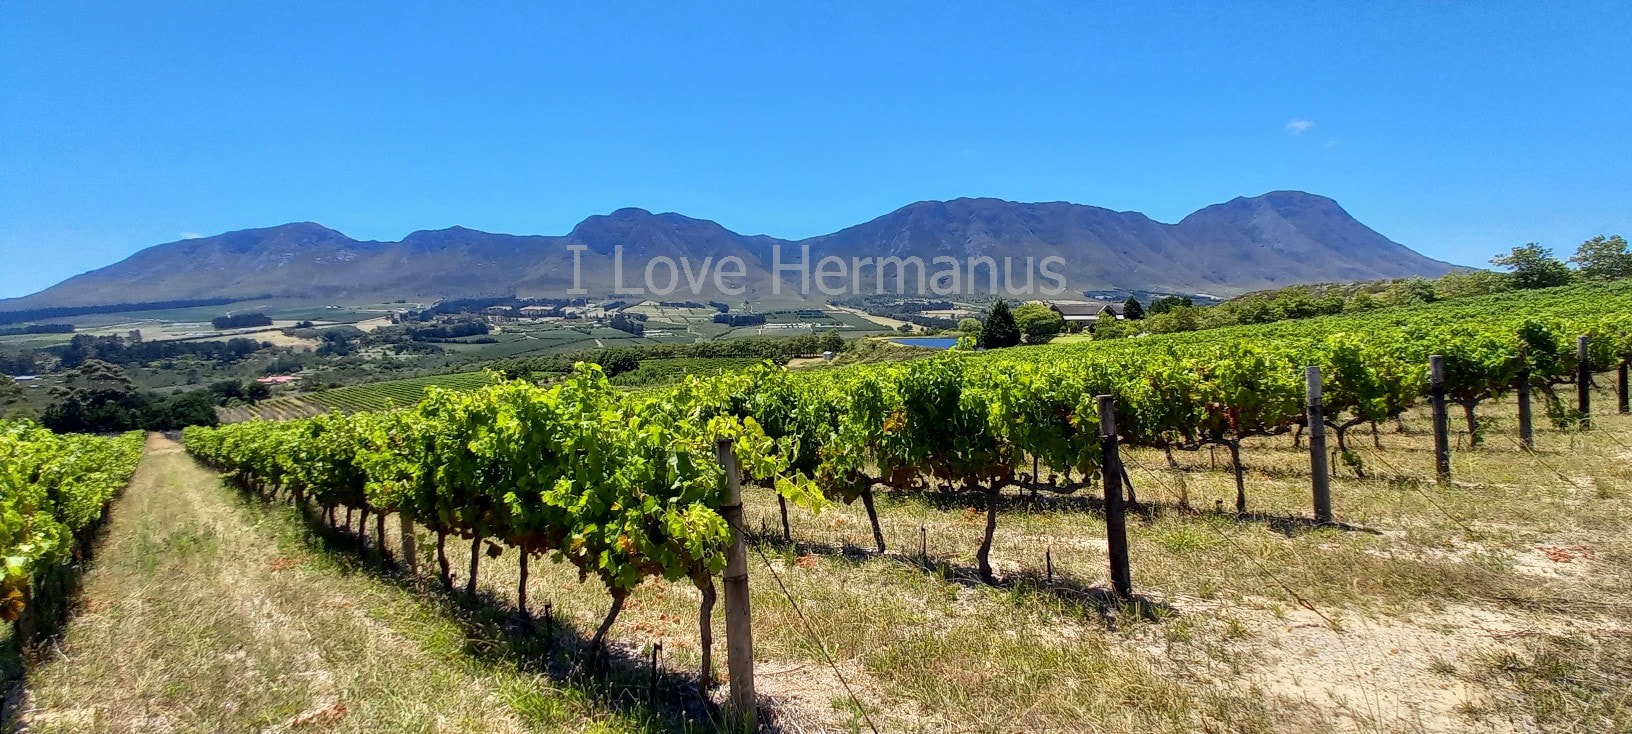 Hermanus award winning wine valley, Hemel-en-Aarde - producing over 120 great wines at over 22 independent wineries, near Cape Town, South Africa